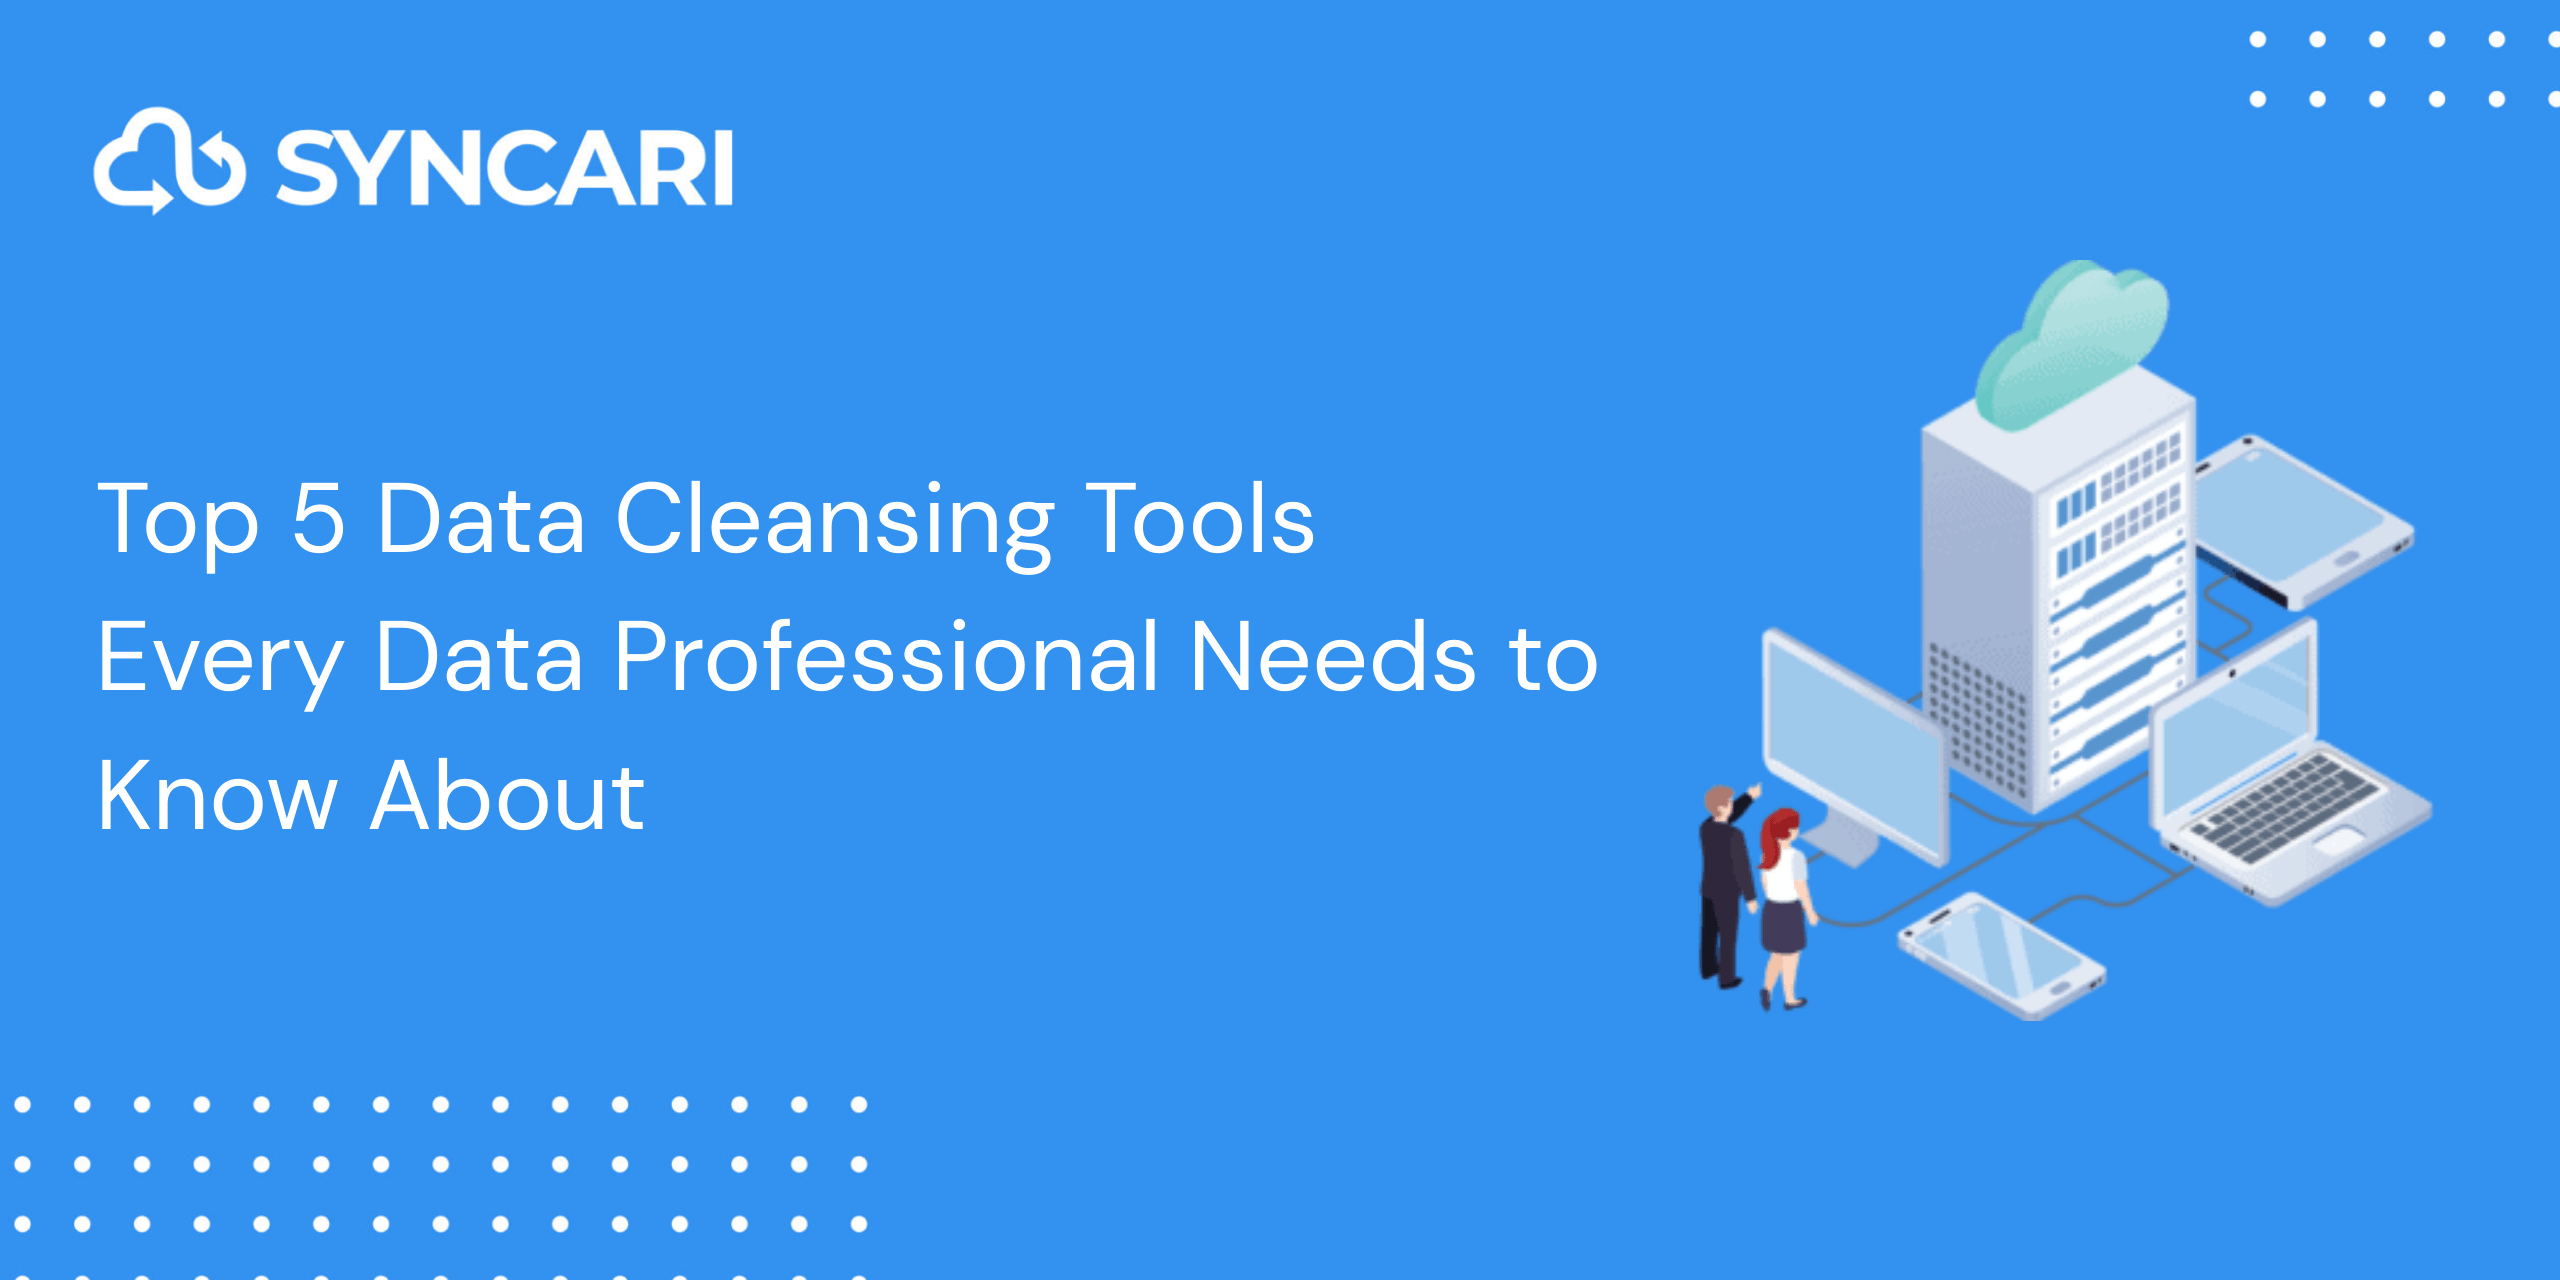 Data cleansing tools